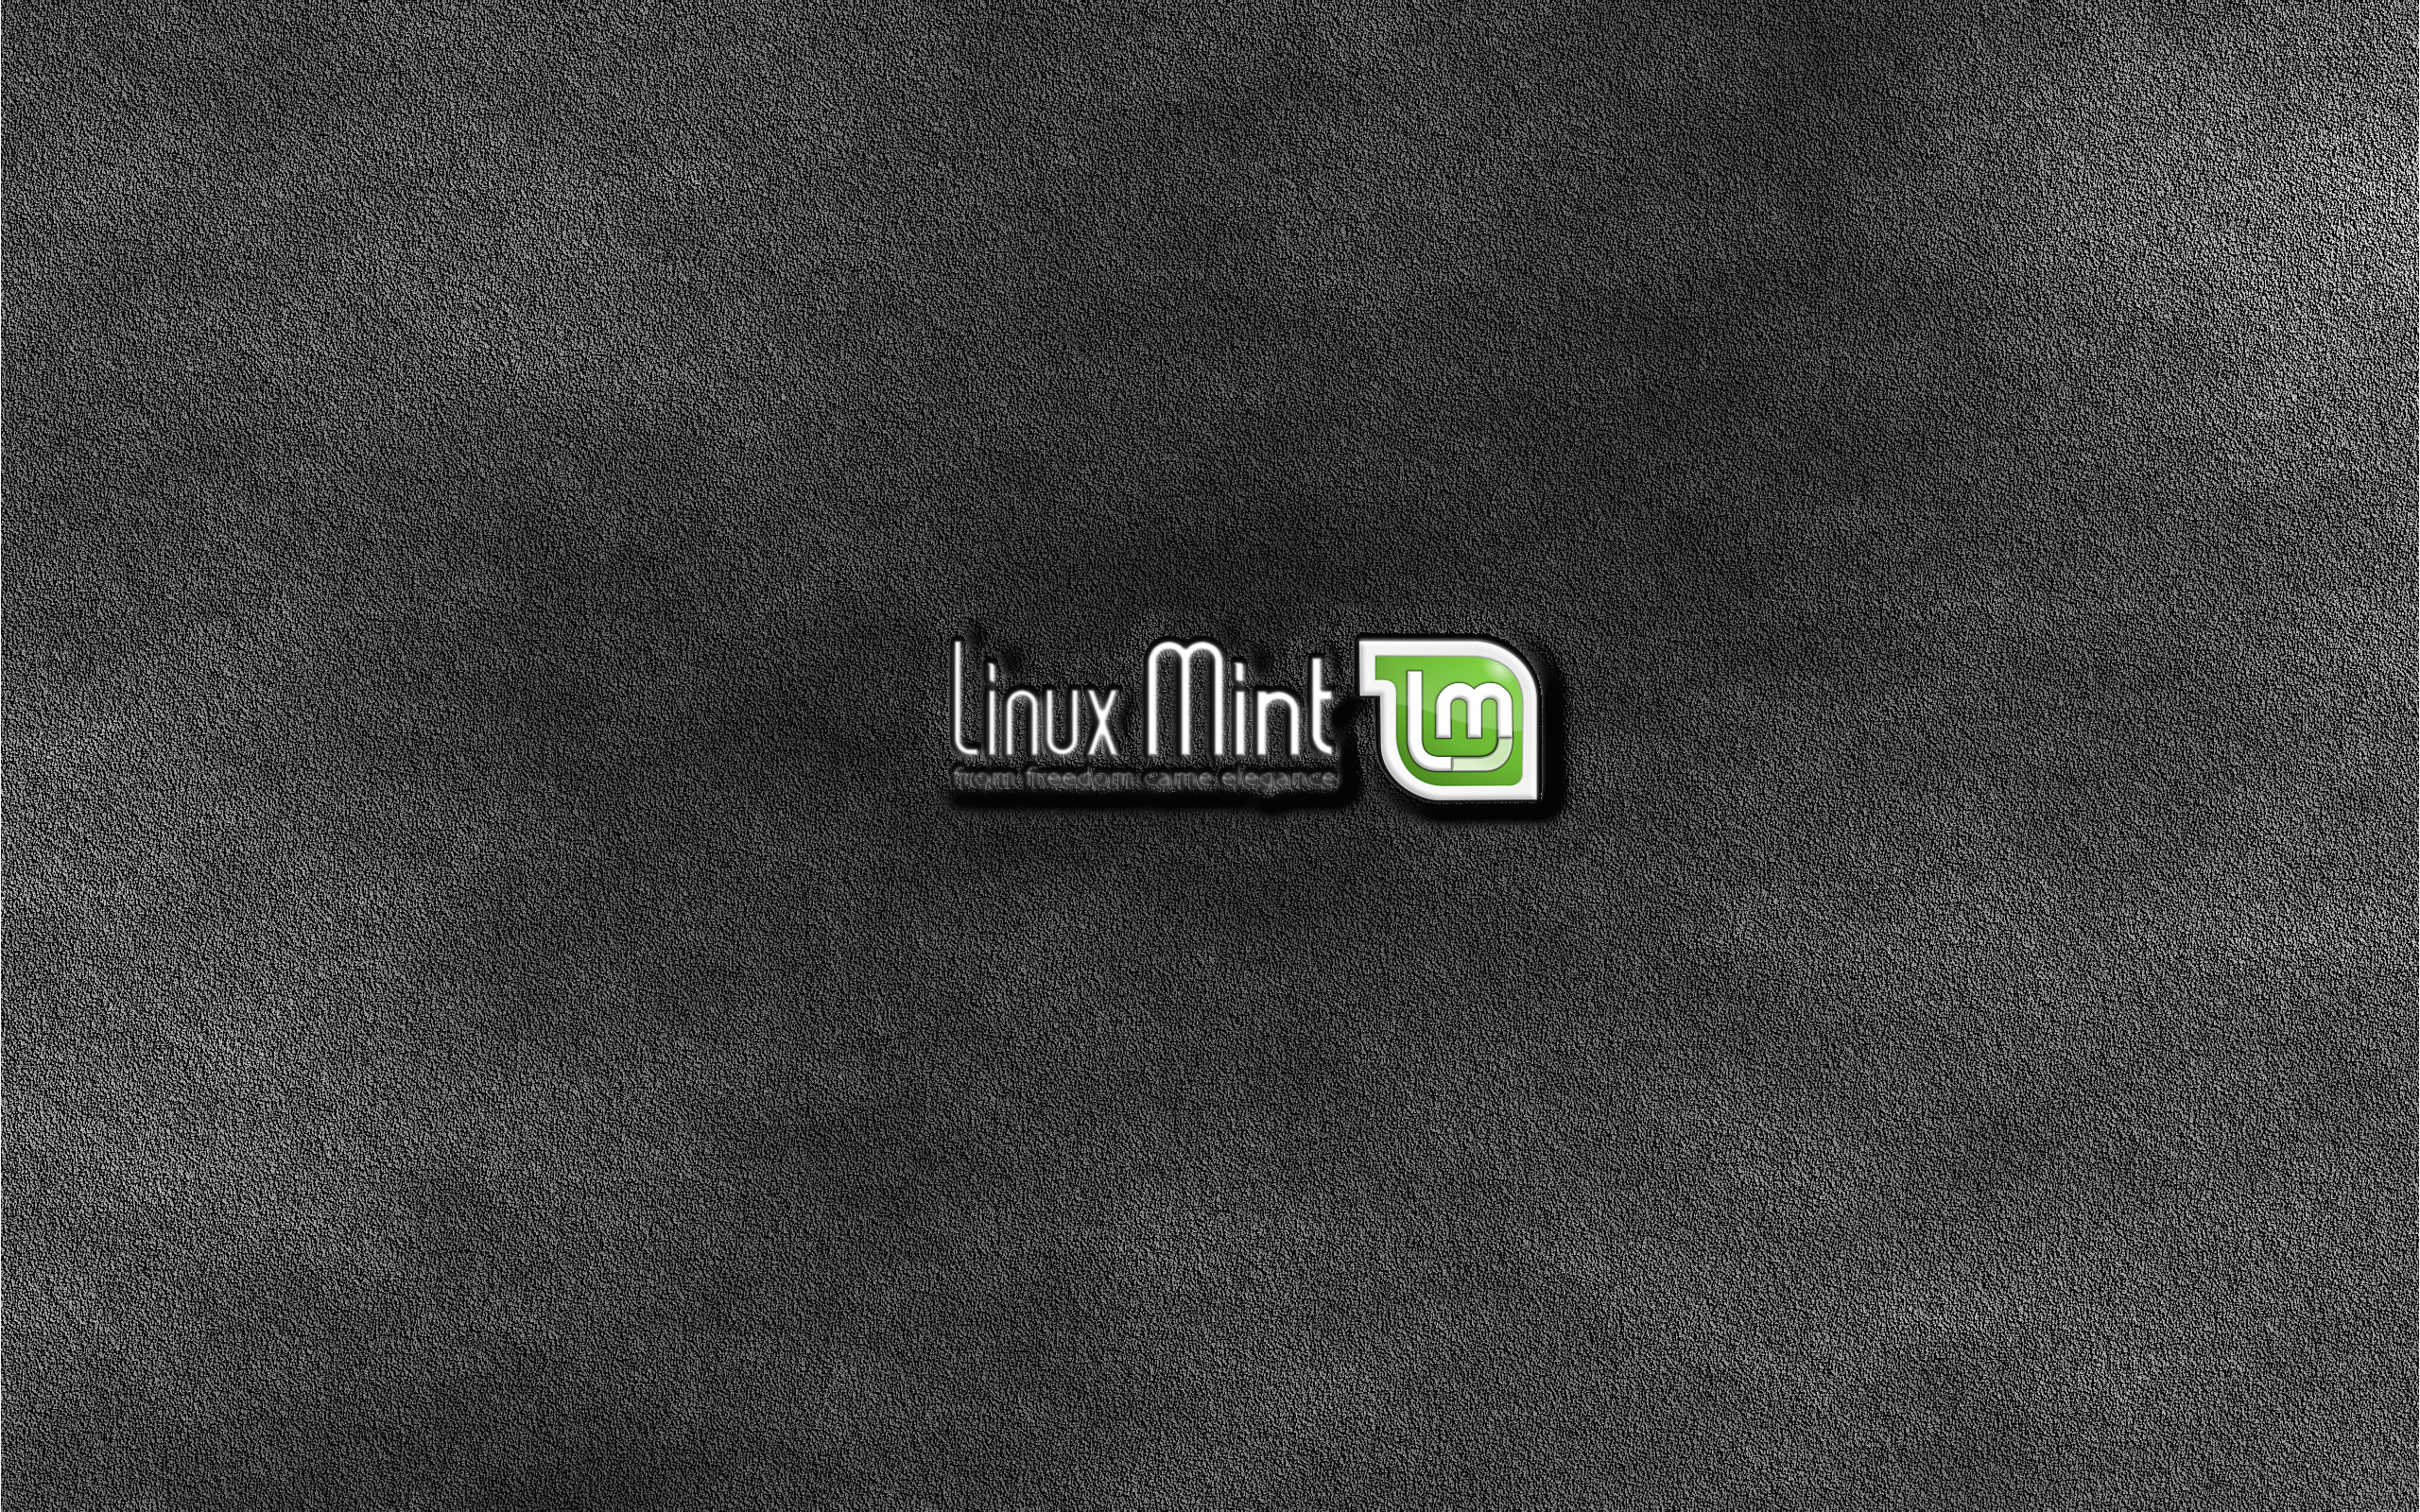 Linux mint Awesome Wallpapers